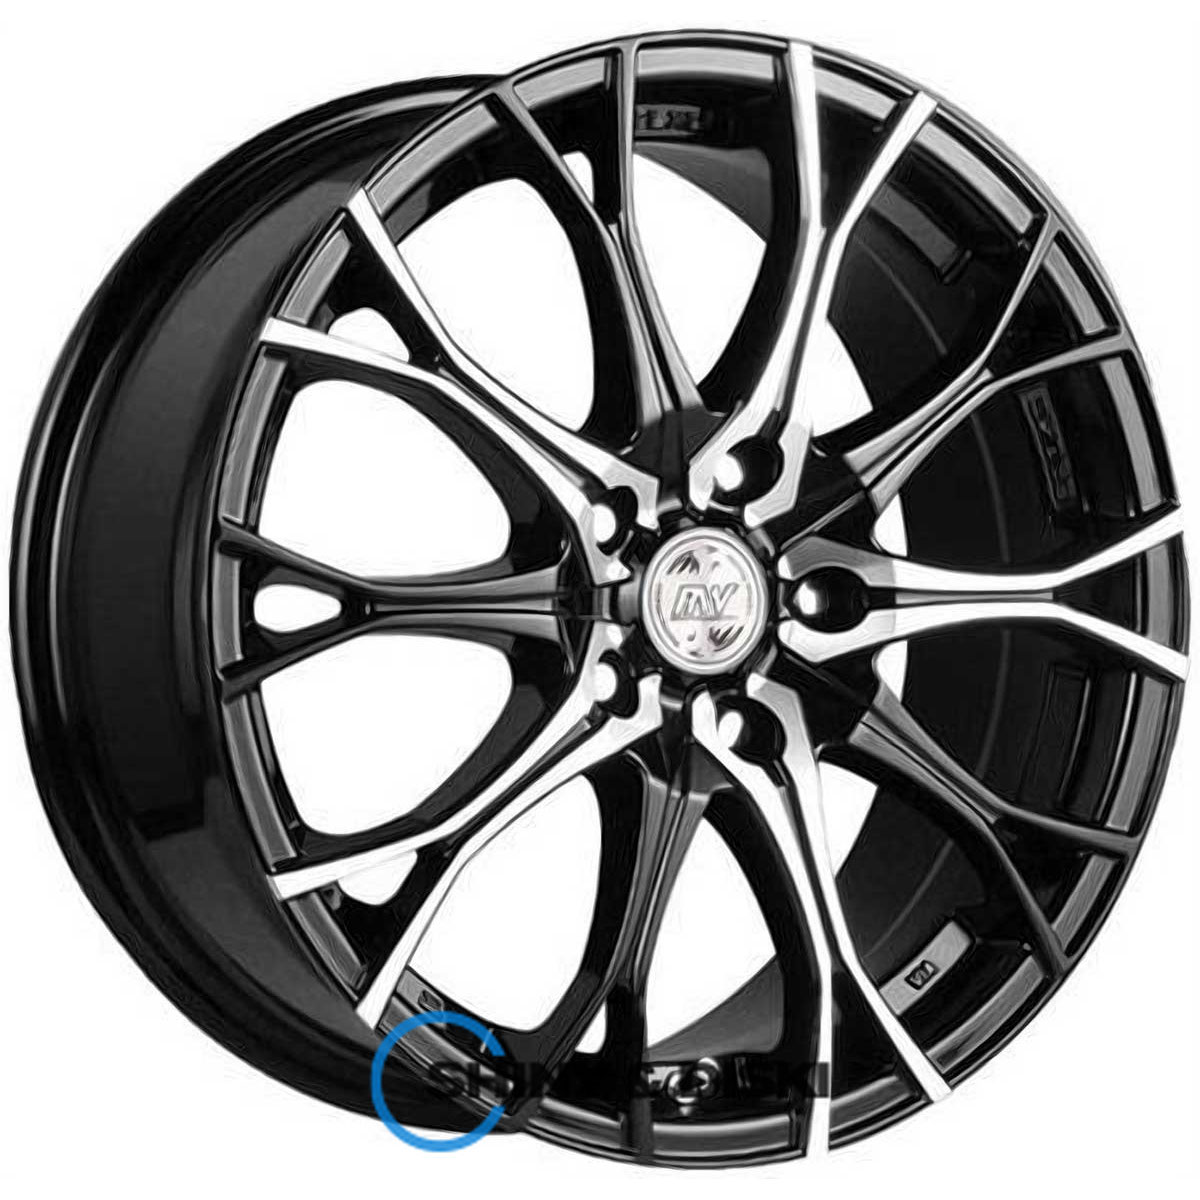 rs tuning h-530 bkfp r16 w7 pcd5x112 et40 dia66.6